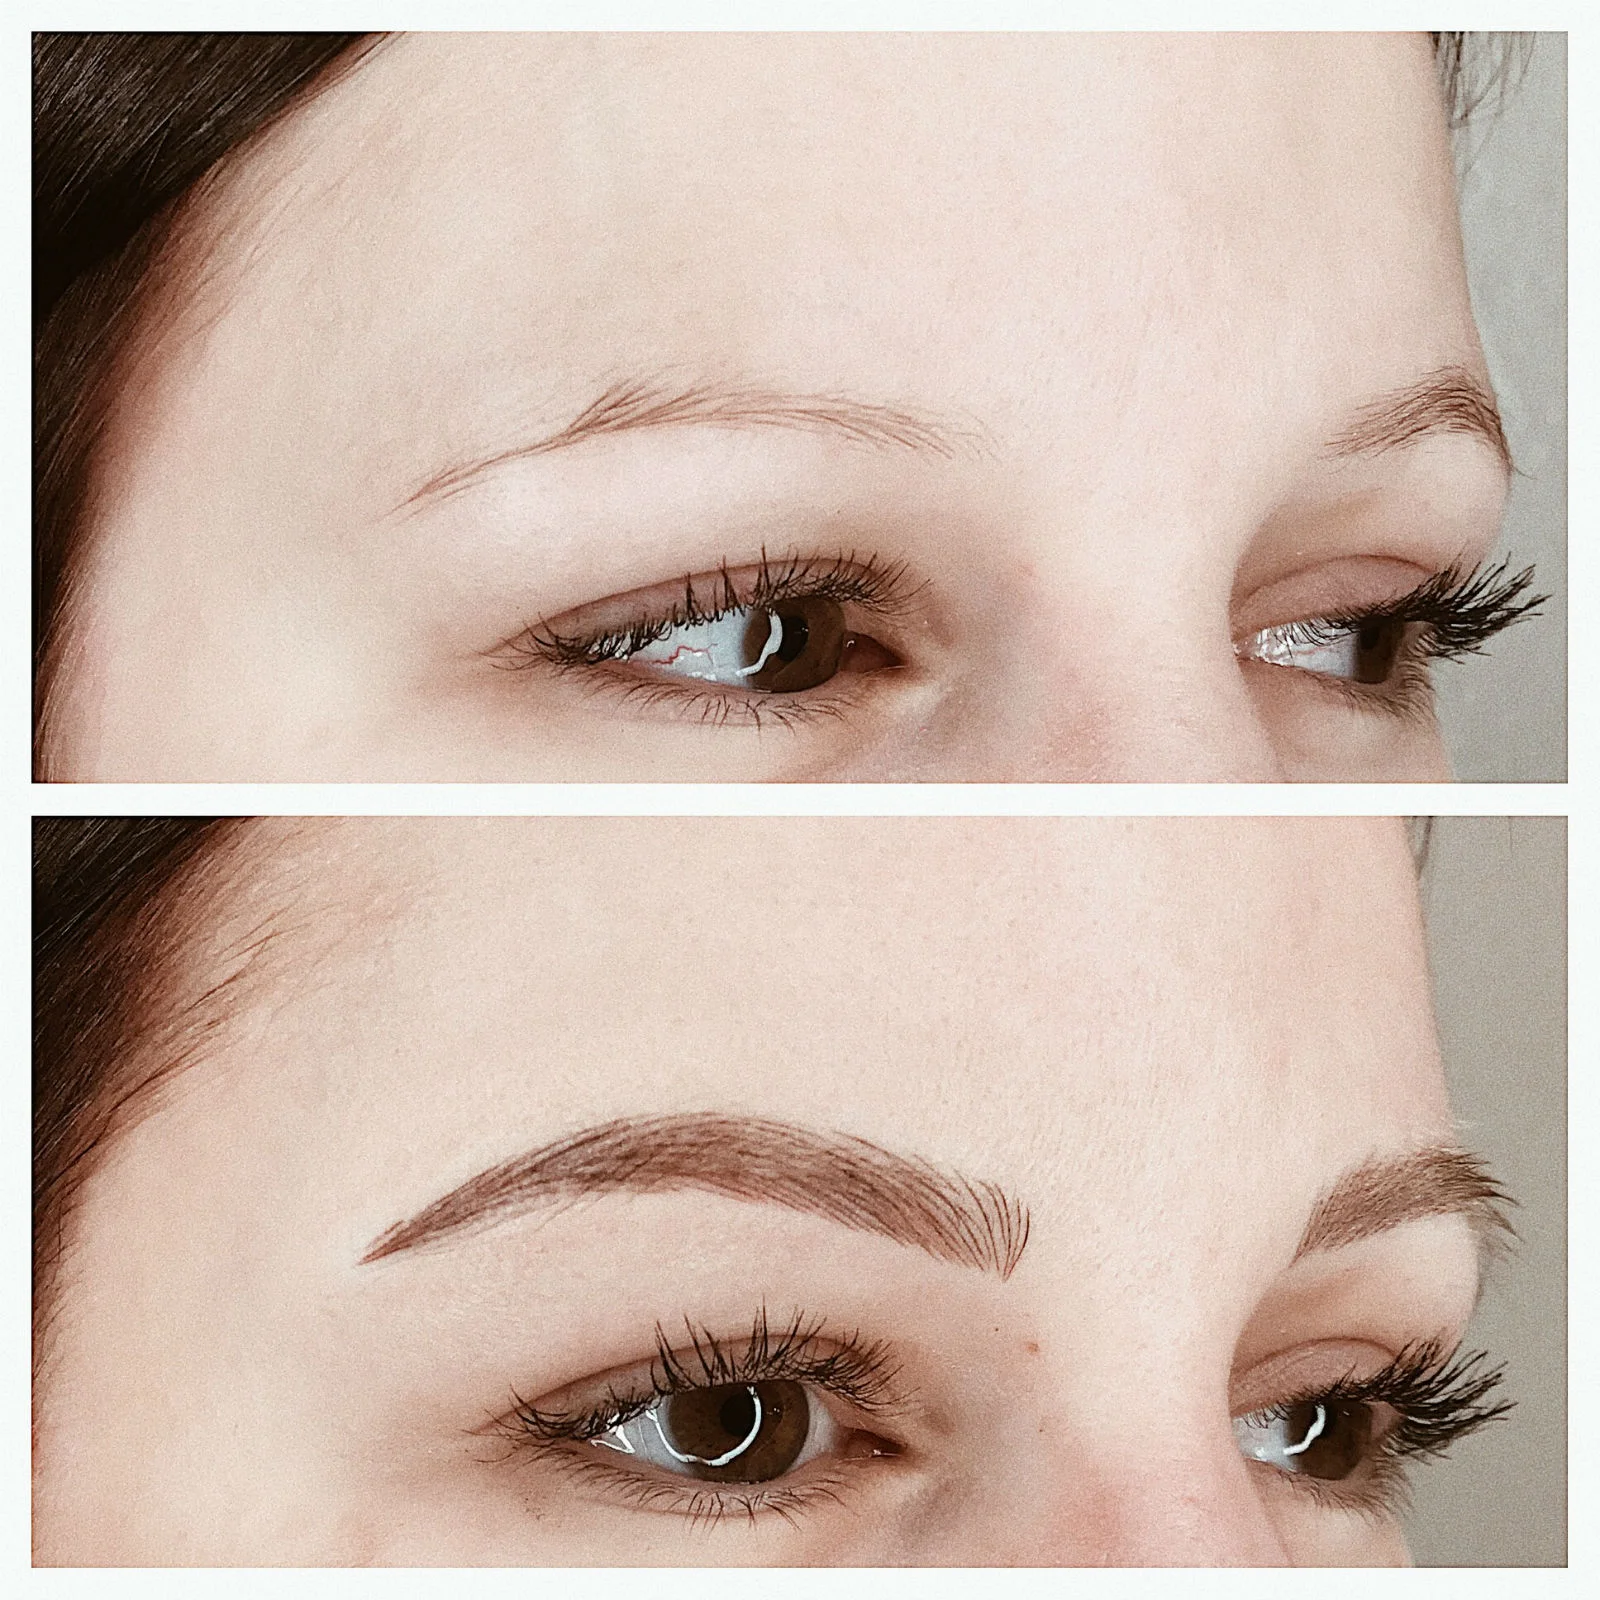 What is the most natural Eyebrow Procedure